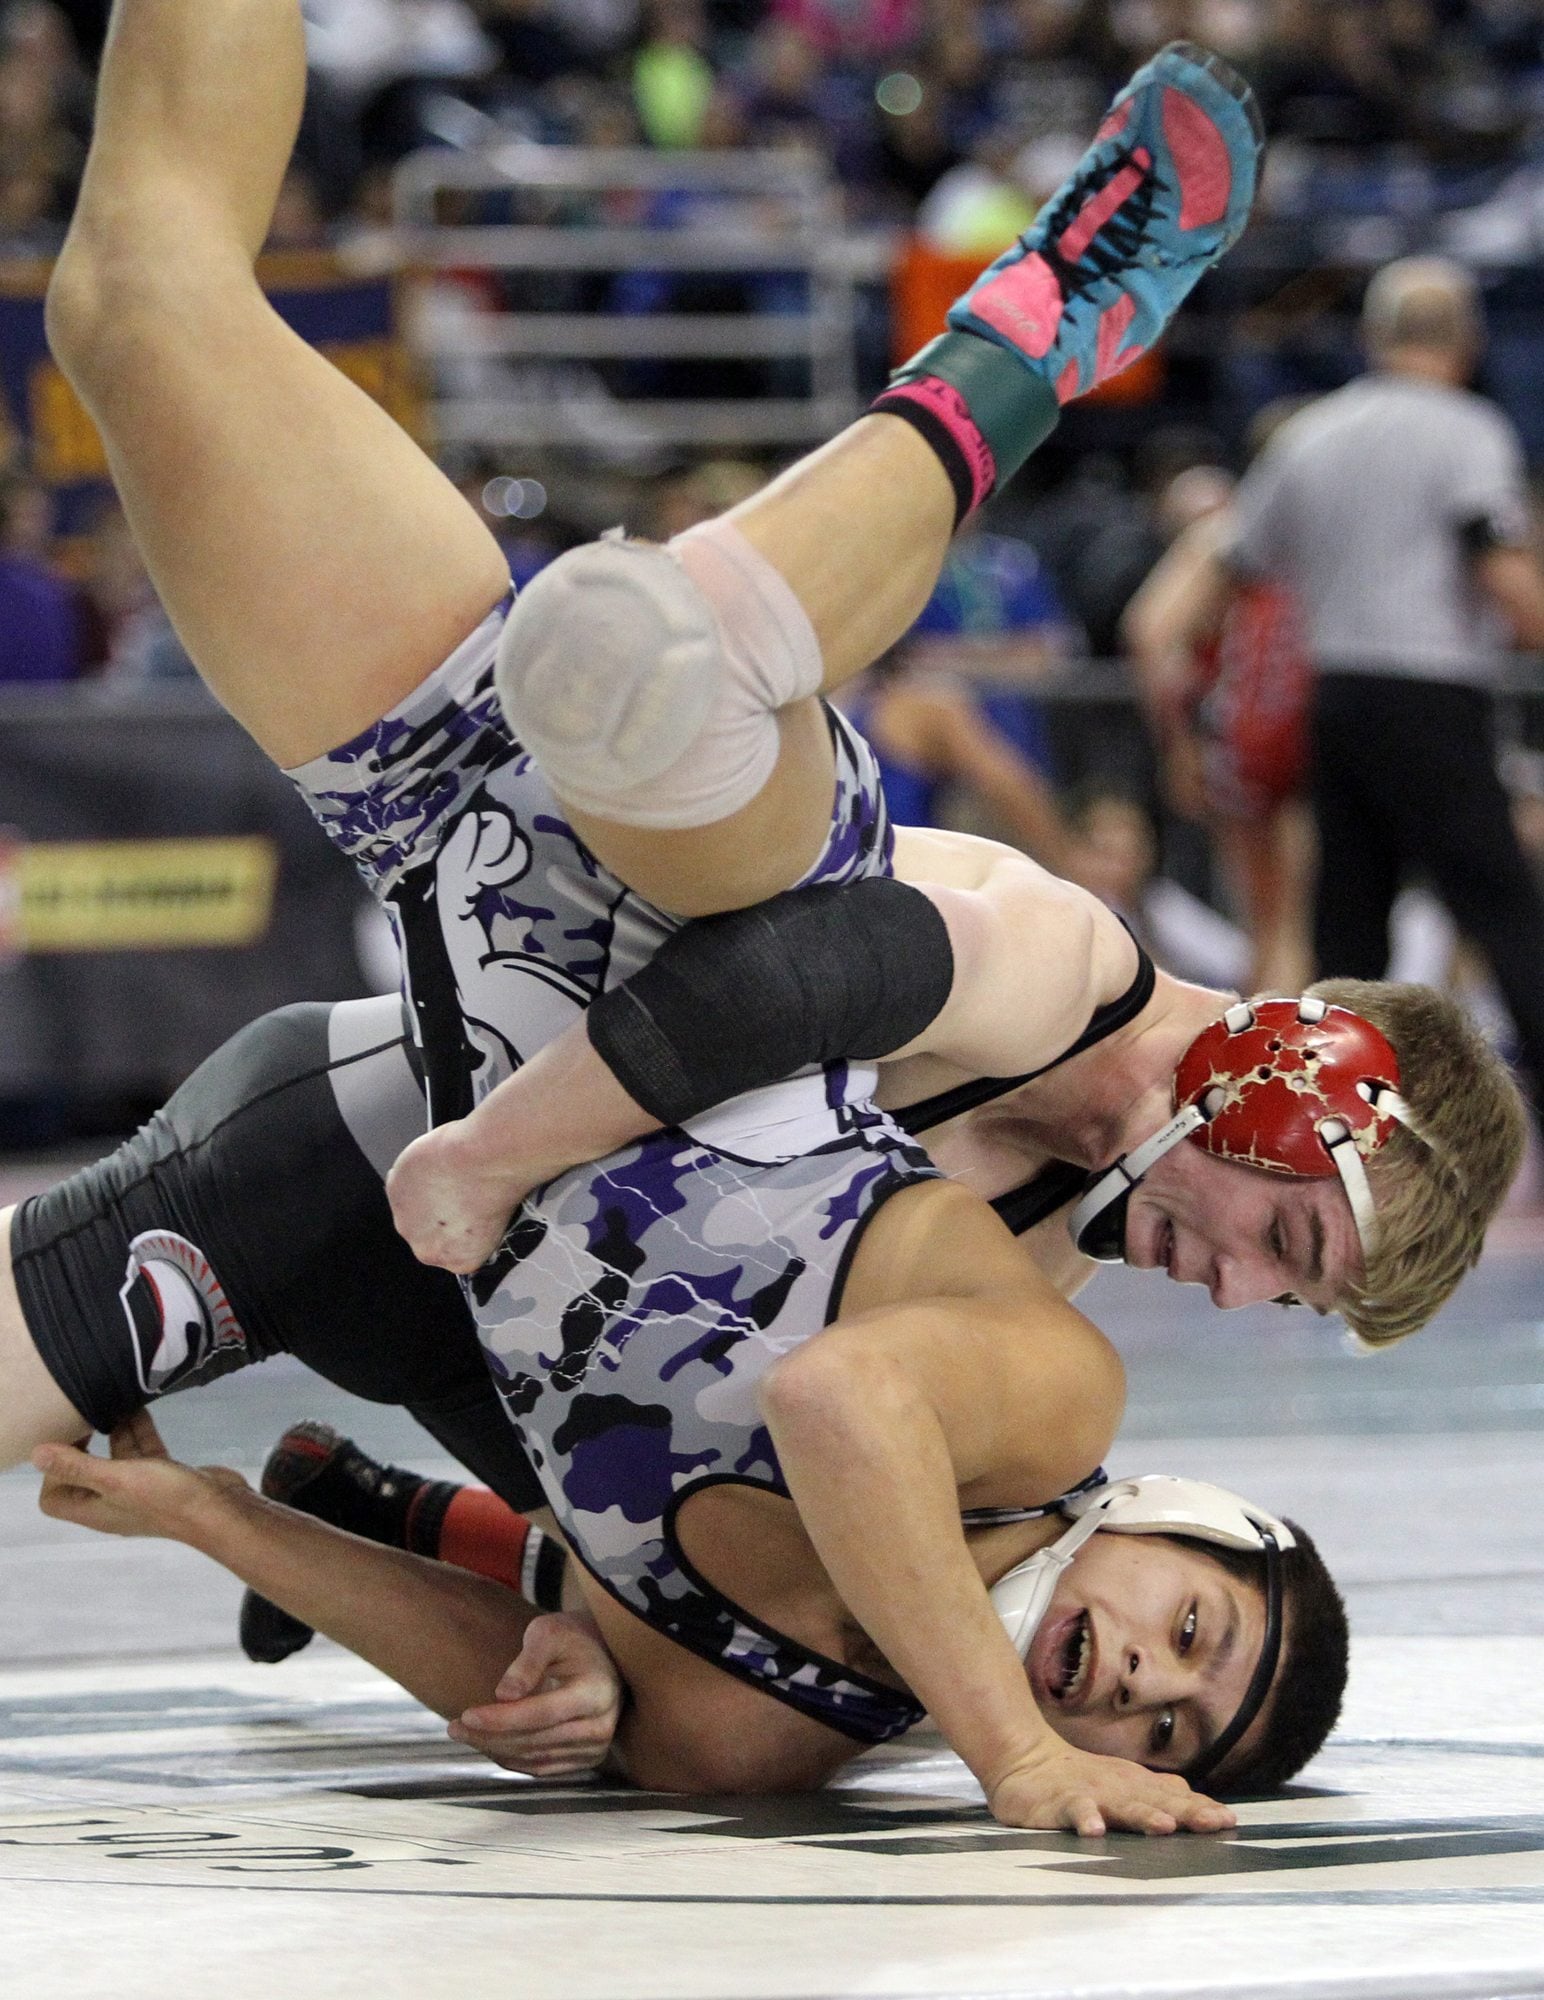 Union's Tommy Strassenberg takes down Yelm's Chayton Miller to earn two points in their 152 pound match on Friday, Feb, 19, 2016 at the Mat Classic XXVIII held in the Tacoma Dome.